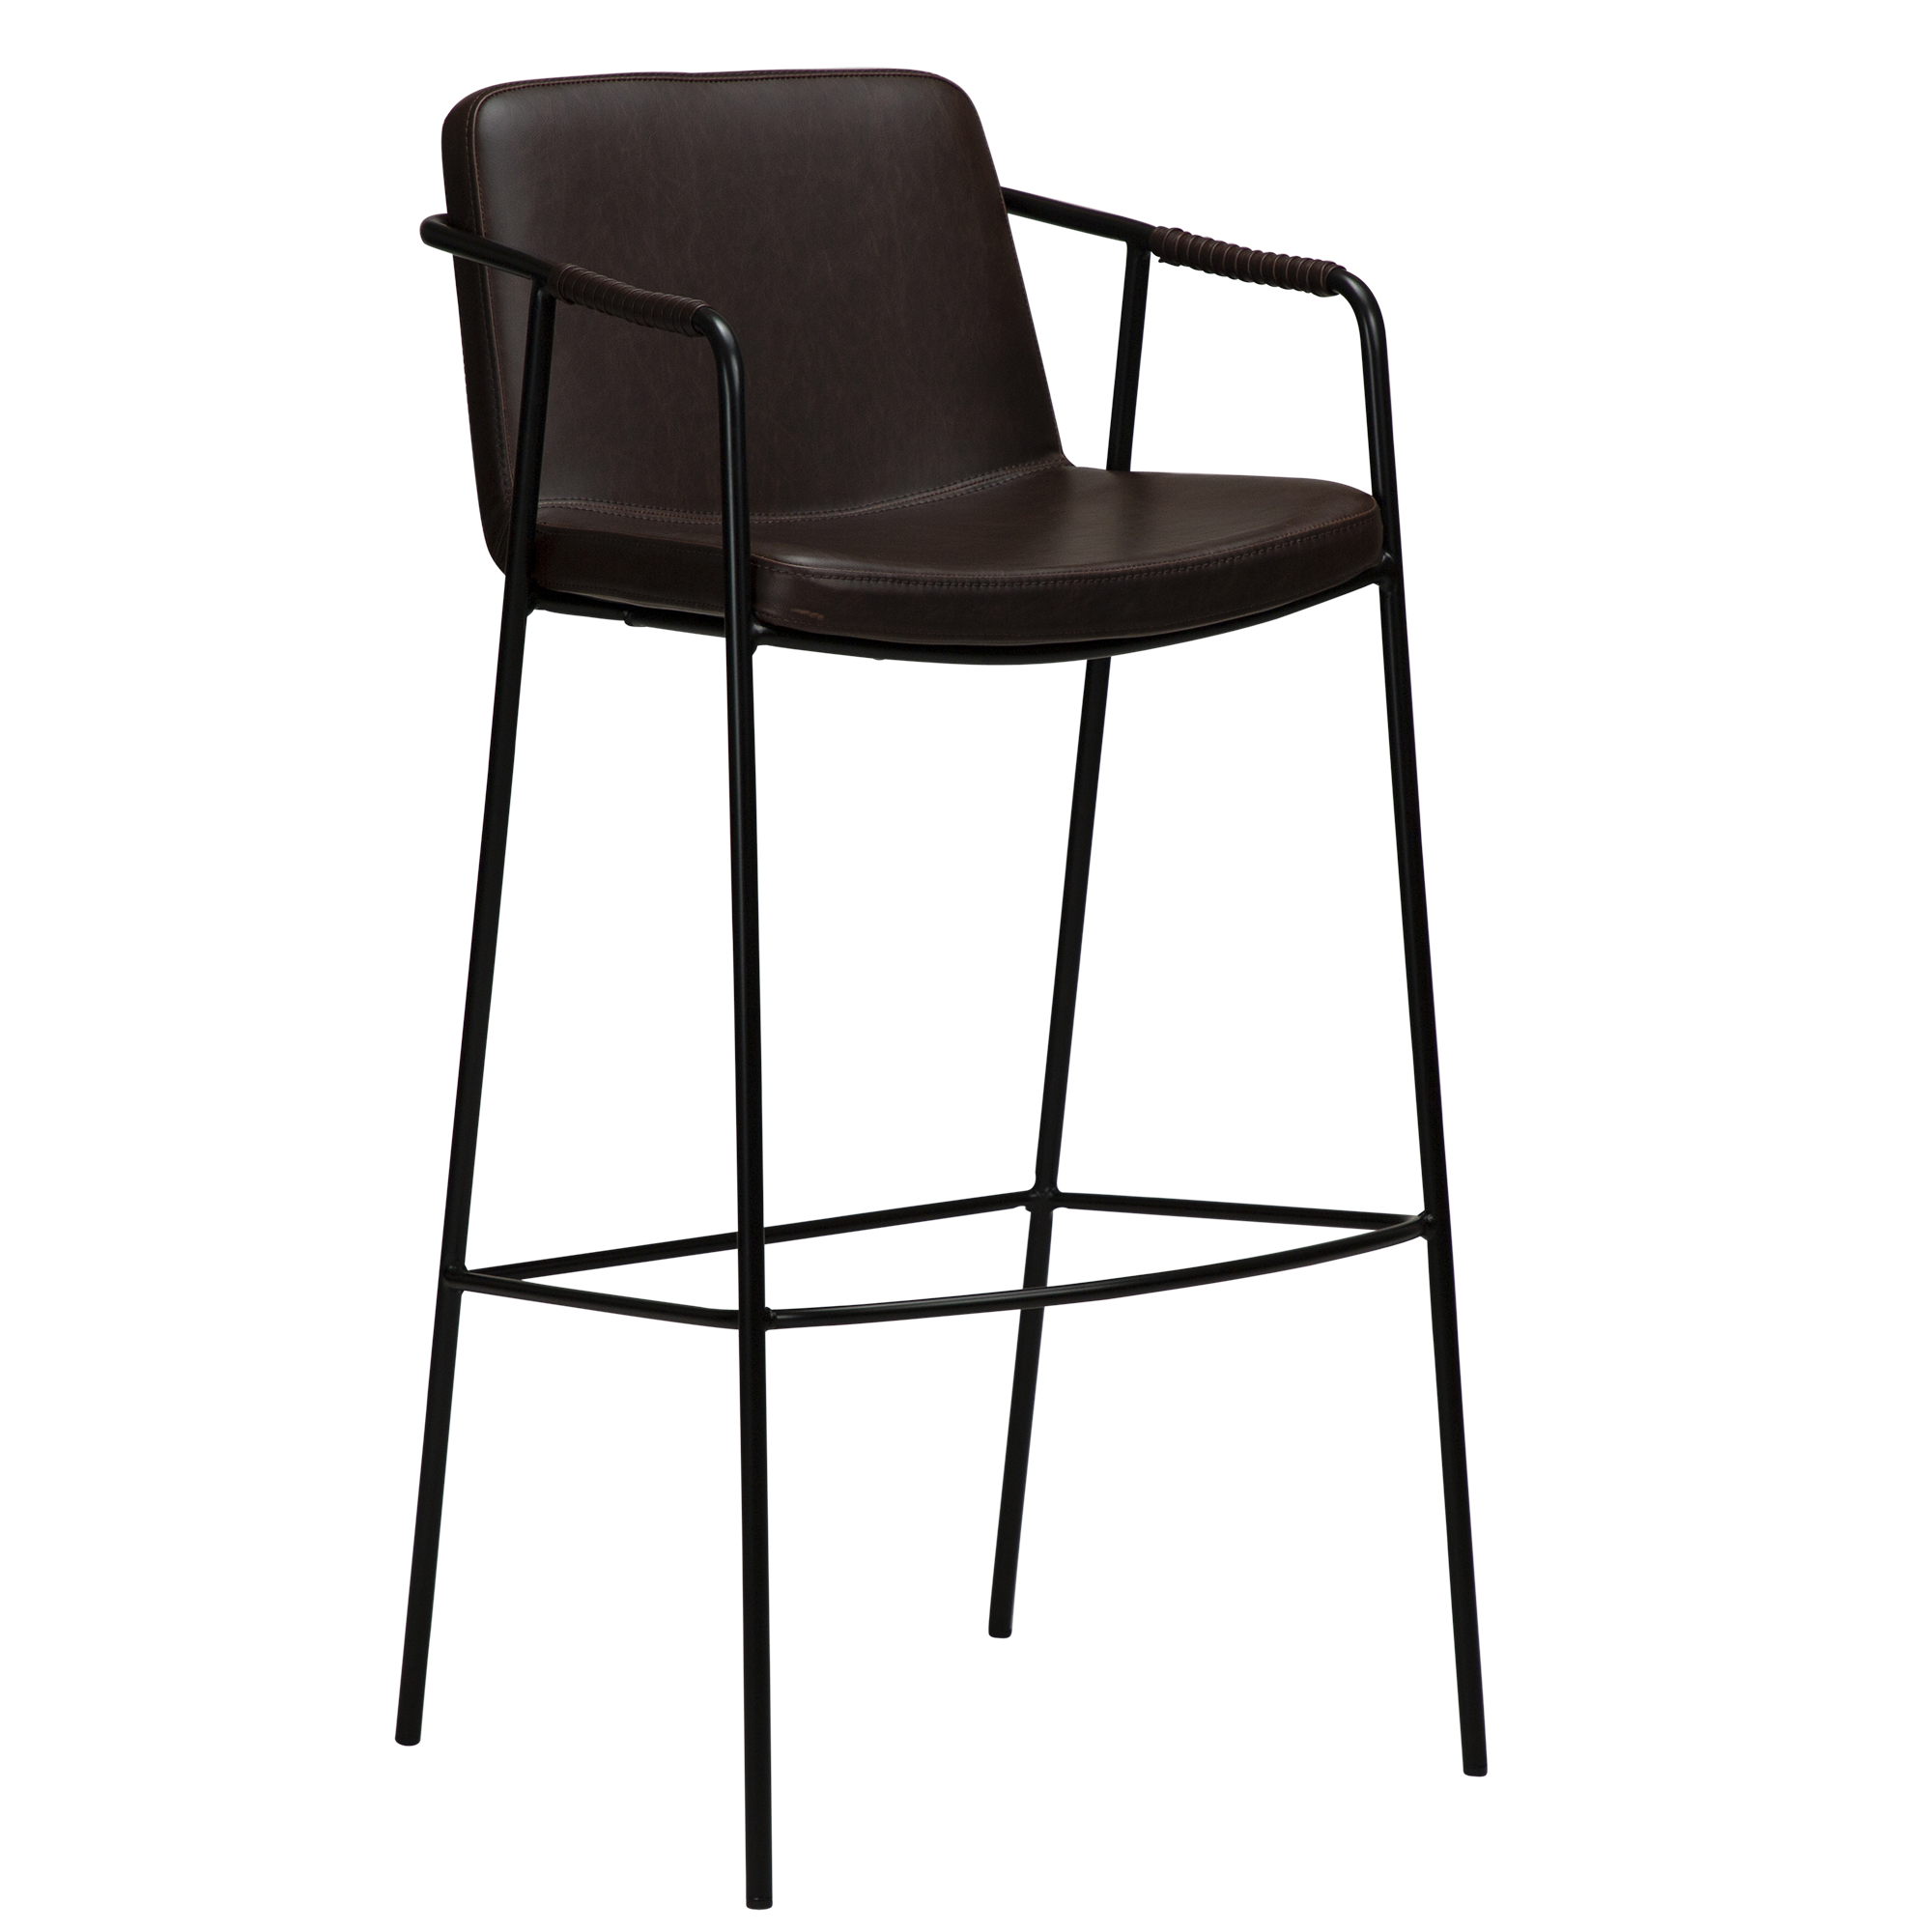 Boto Bar Stool Vintage Cocoa Art Leather With Black Metal Legs 200310304 01 Main